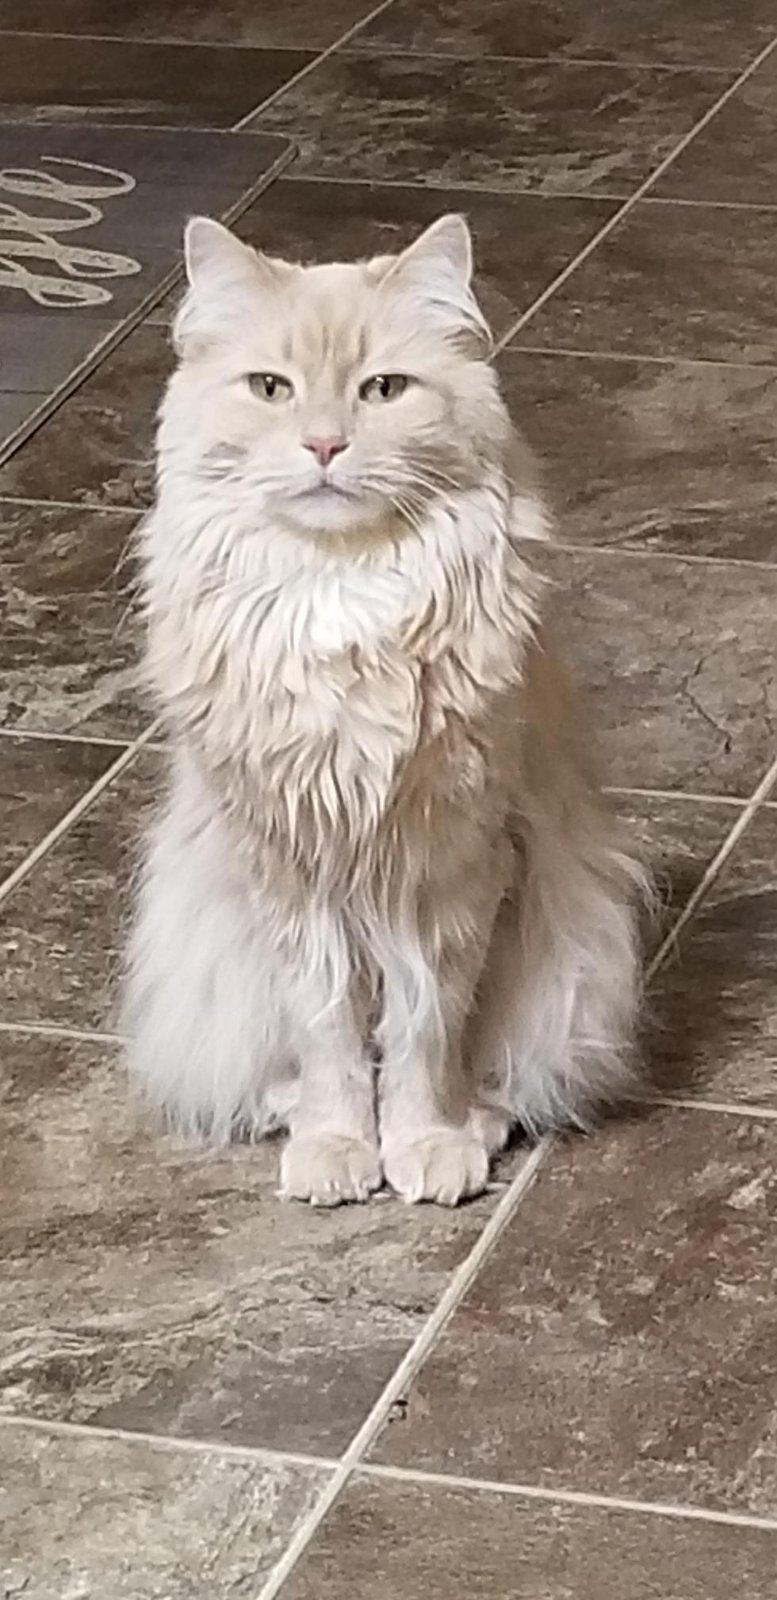 Image of Mr. Whiskers (Kitty), Lost Cat